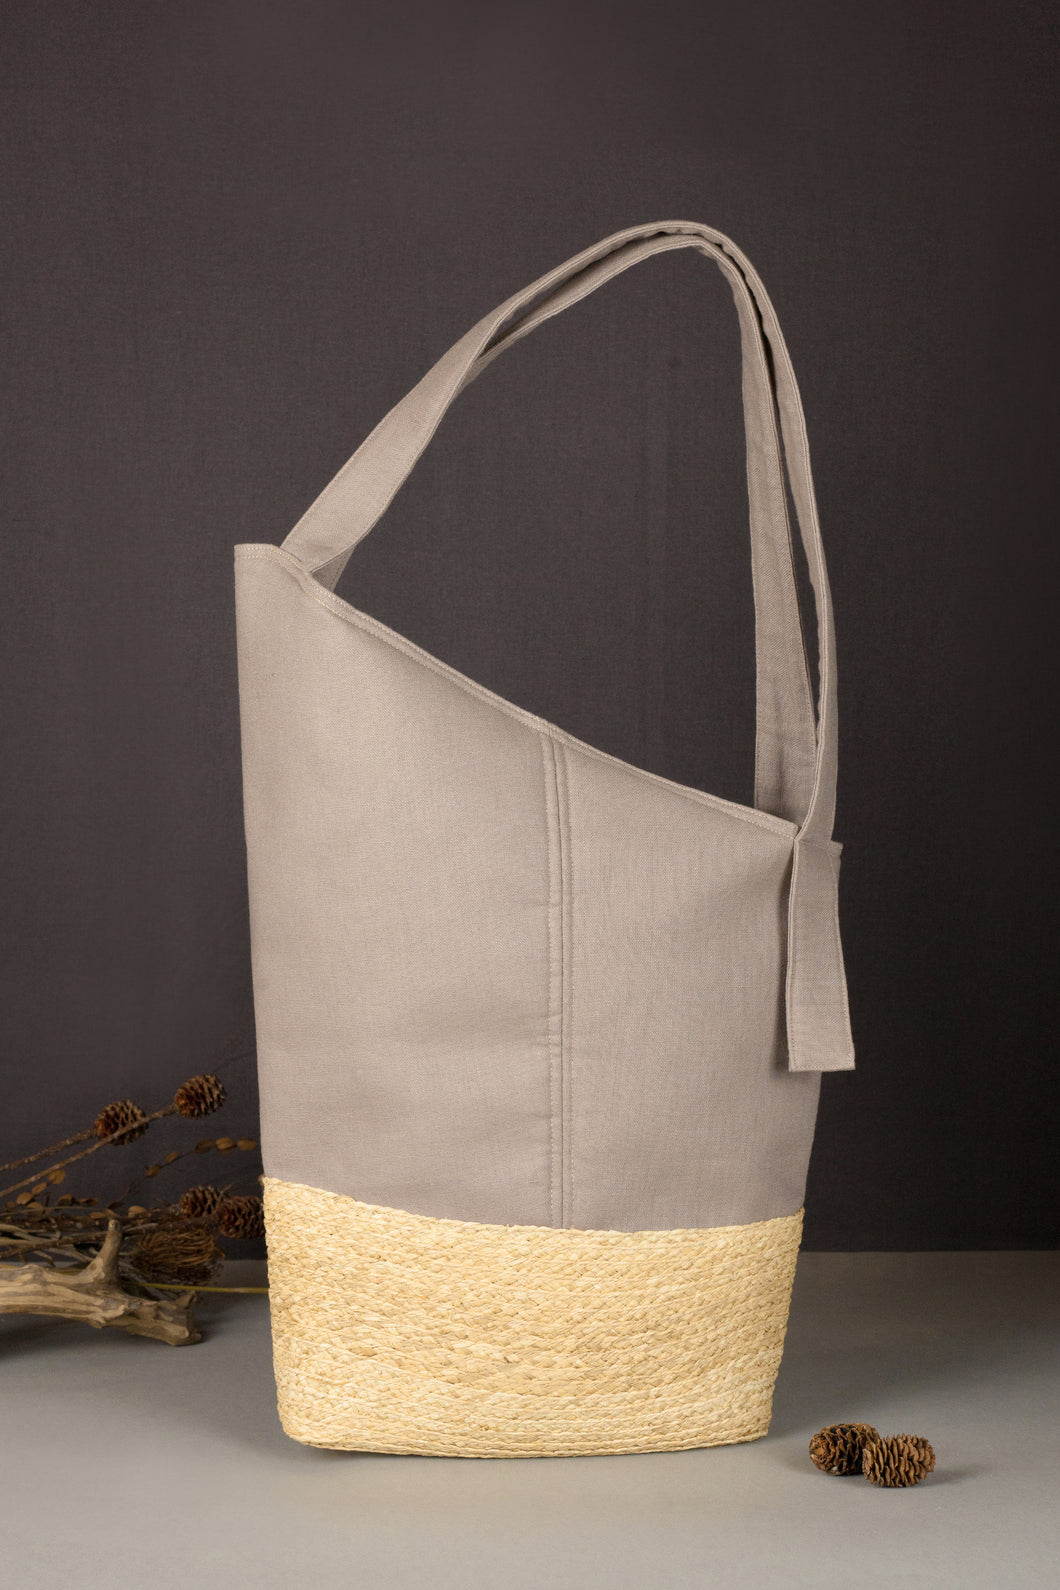 The faye bag is a bag born with contrasting symmetry, a high bag, made of 2 materials of sedge and linen.